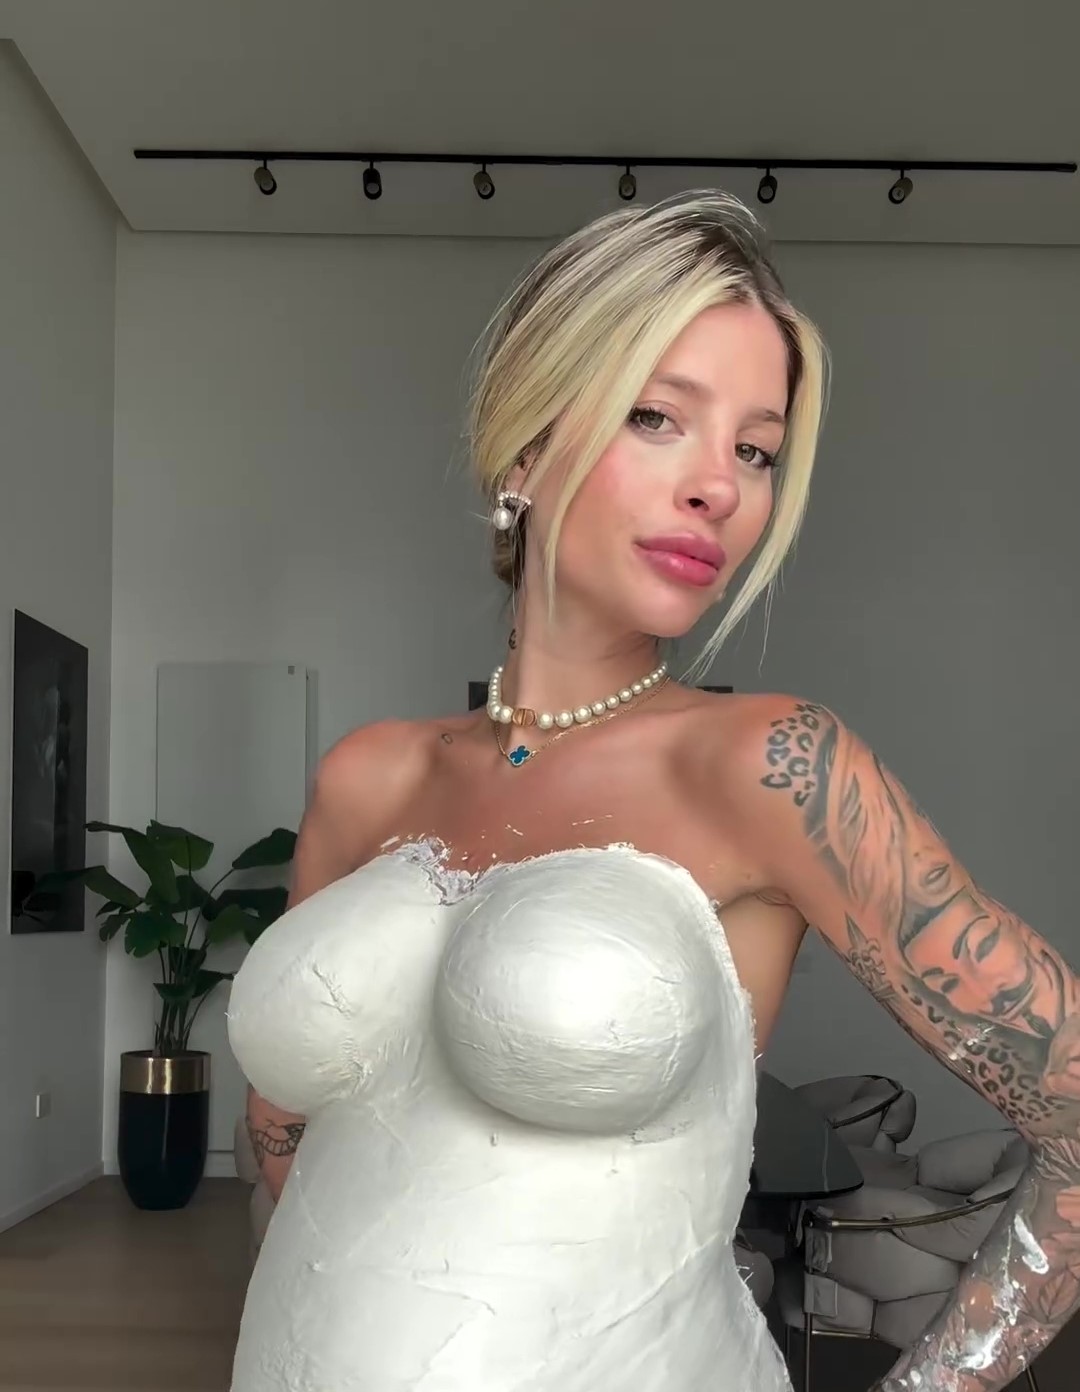 Heavily pregnant model Chiara Nasti, wife of footballer Mattia Zaccagni, faces backlash over chest and baby bump cast video, but receives support from her artist Marcella Loffredo.